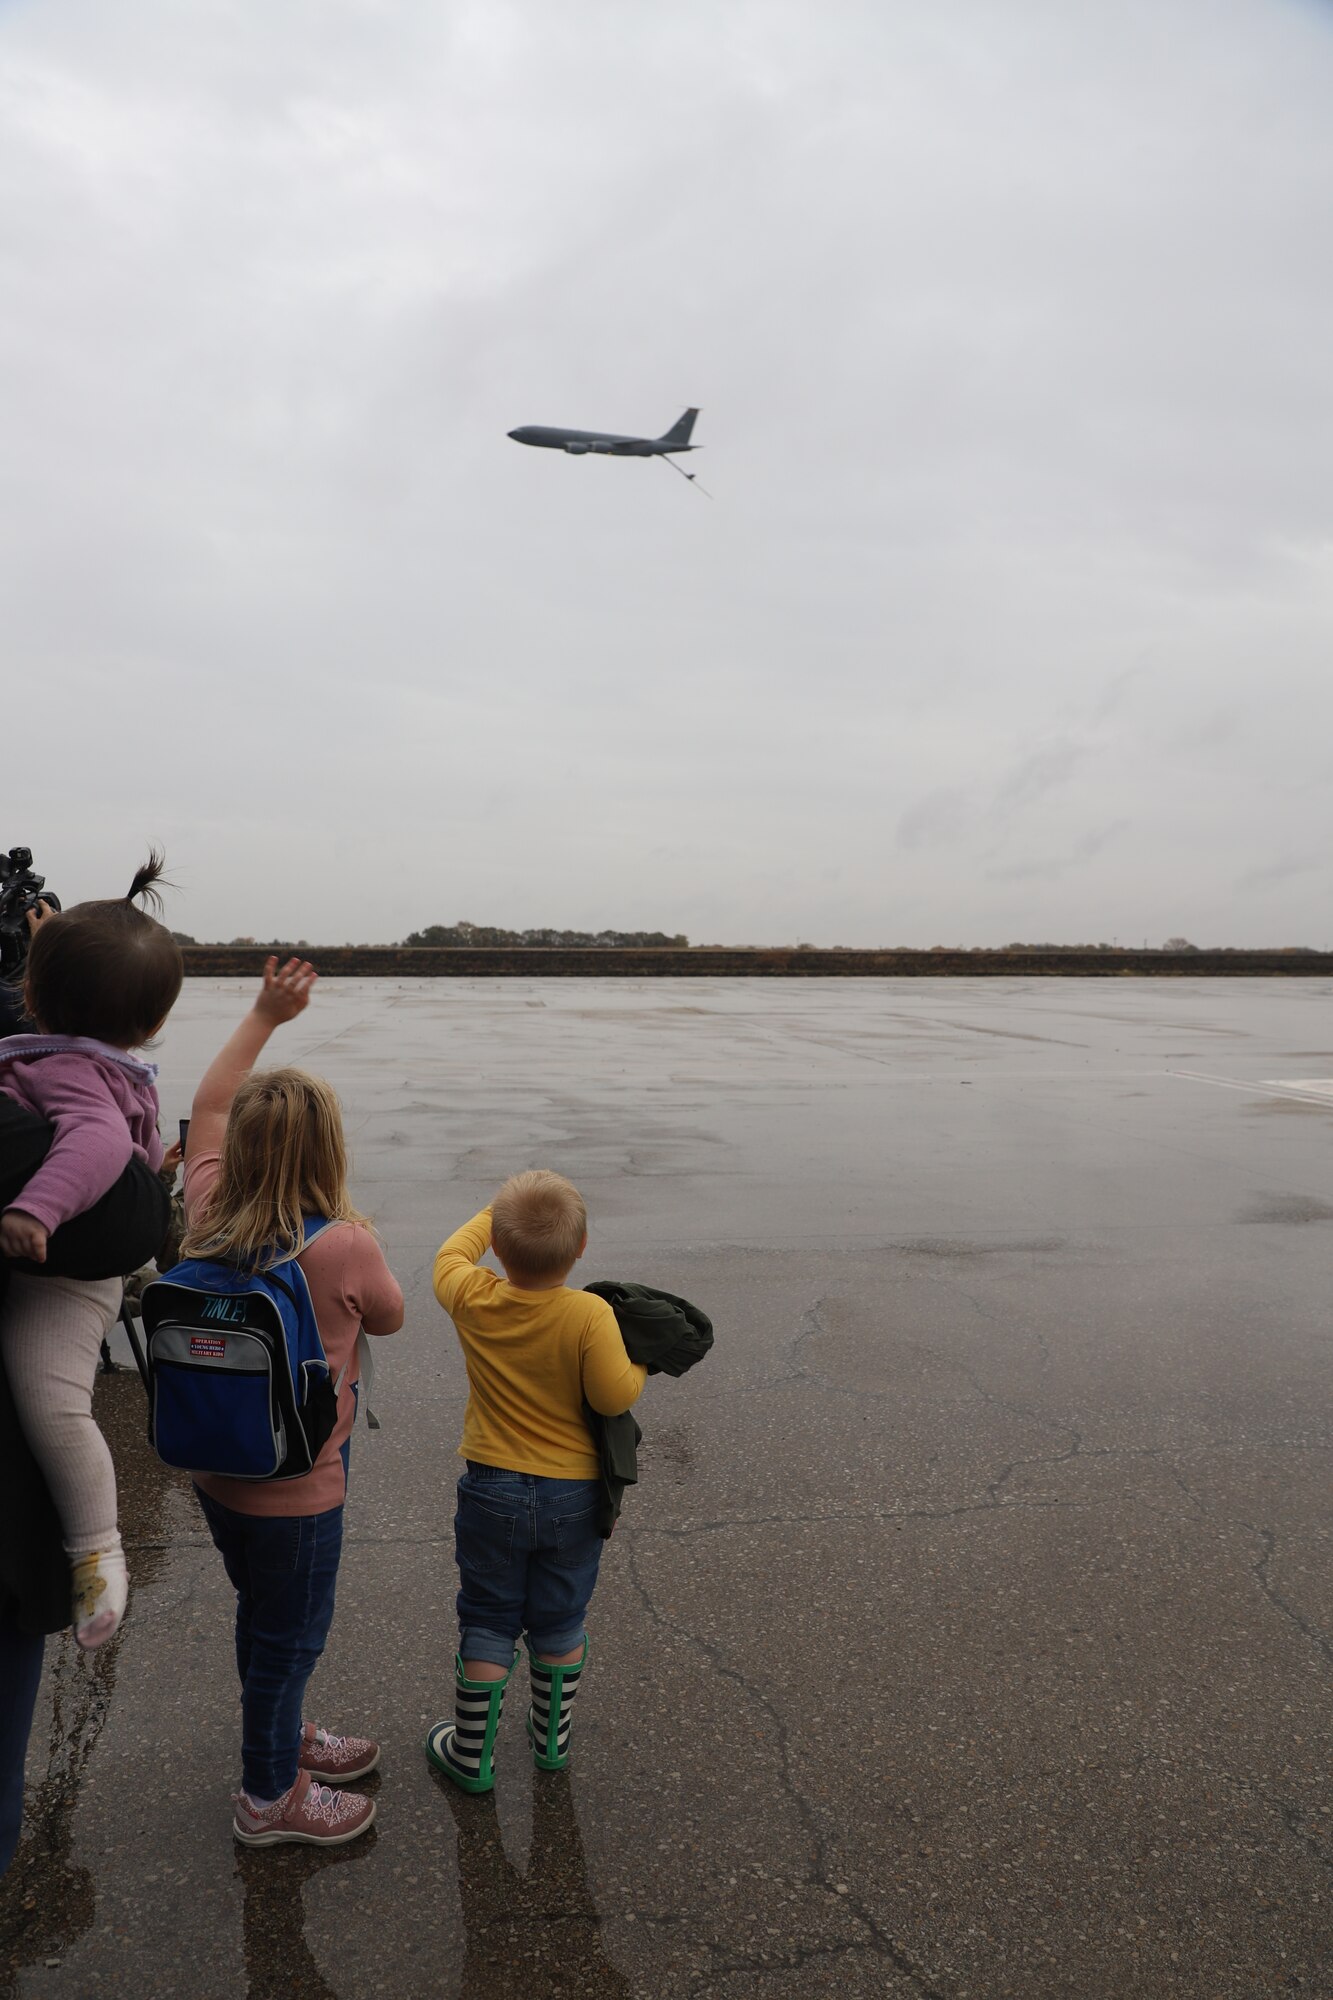 Tinley Benyshek, Pilot for the Day, and her brother, Trip, wave at a KC-135 that is flying by with its boom stick down at the 190th Air Refueling Wing in Topeka, KS, October 24, 2022. Tinley is the first Pilot for a Day participant at the 190th ARW.